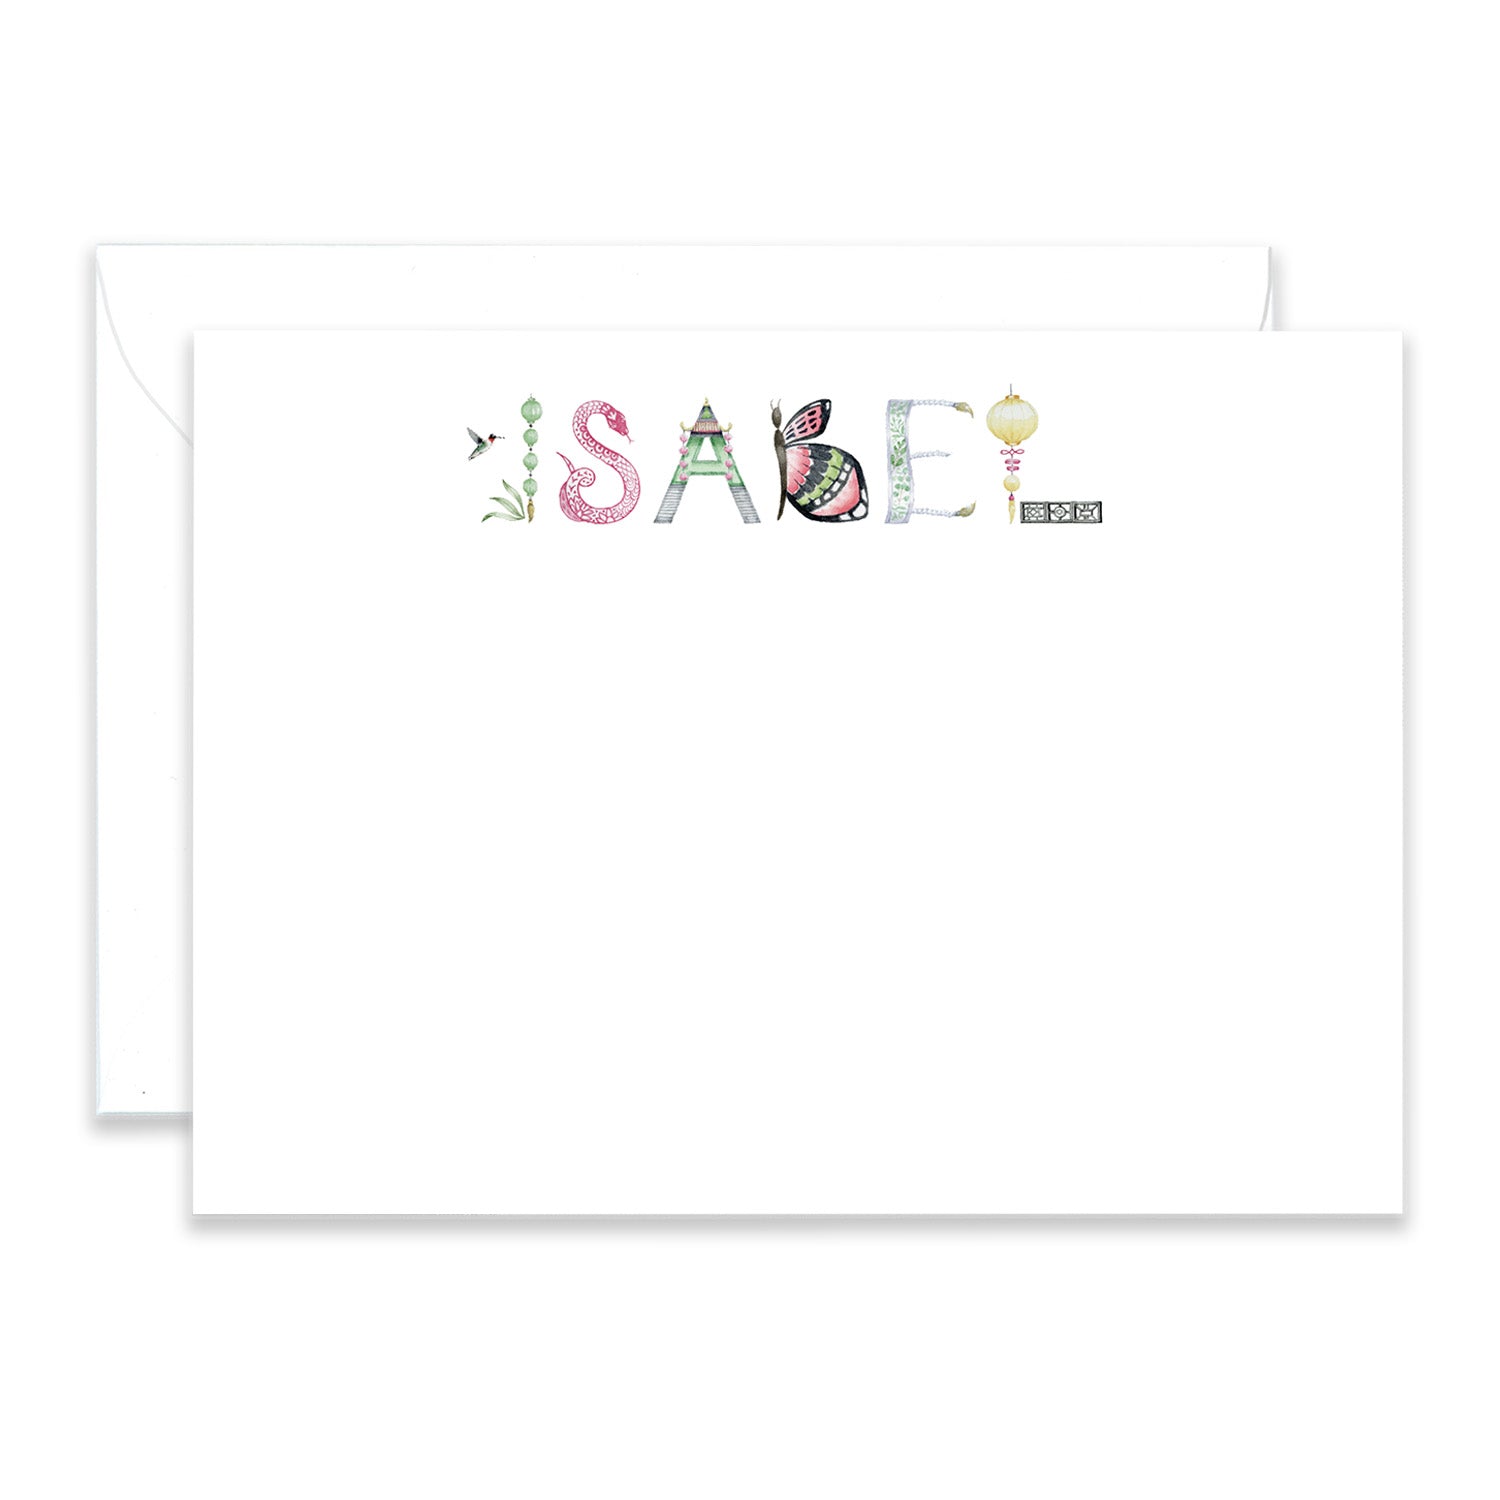 Personalized Chinoiserie Stationery shown in the name "Isabel" with matching envelope